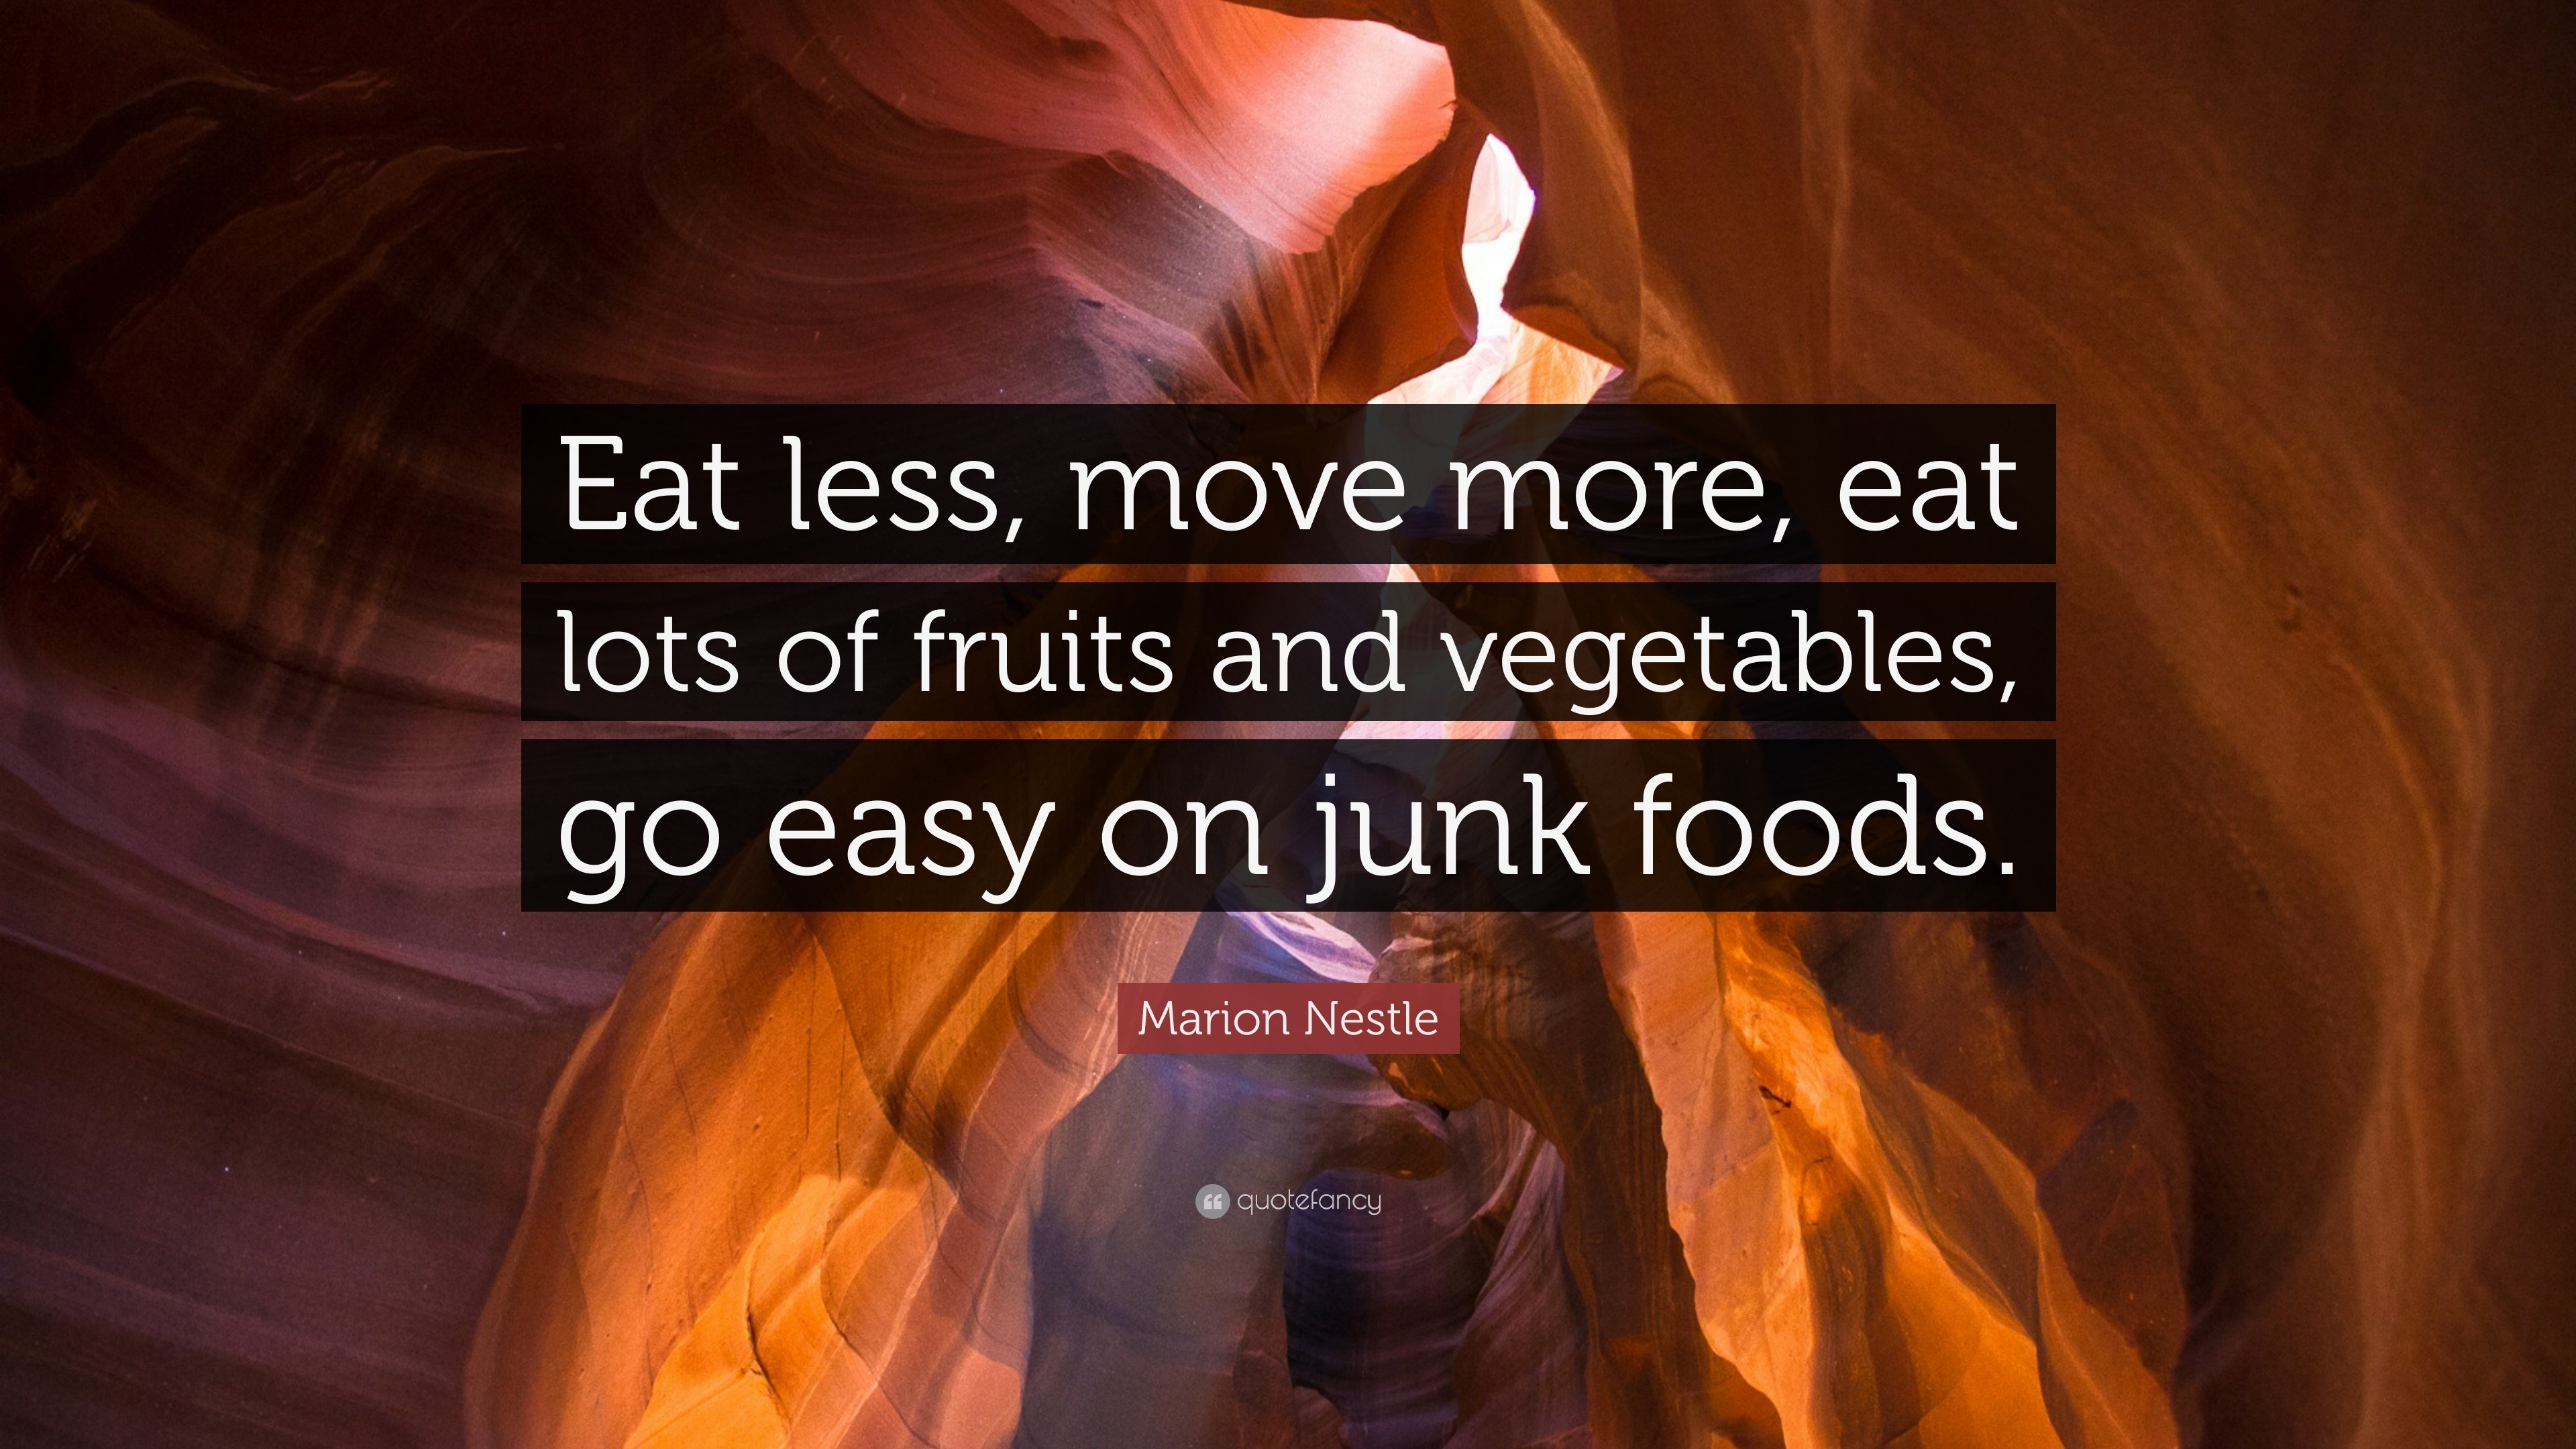 Marion Nestle Quote “eat Less Move More Eat Lots Of Fruits And